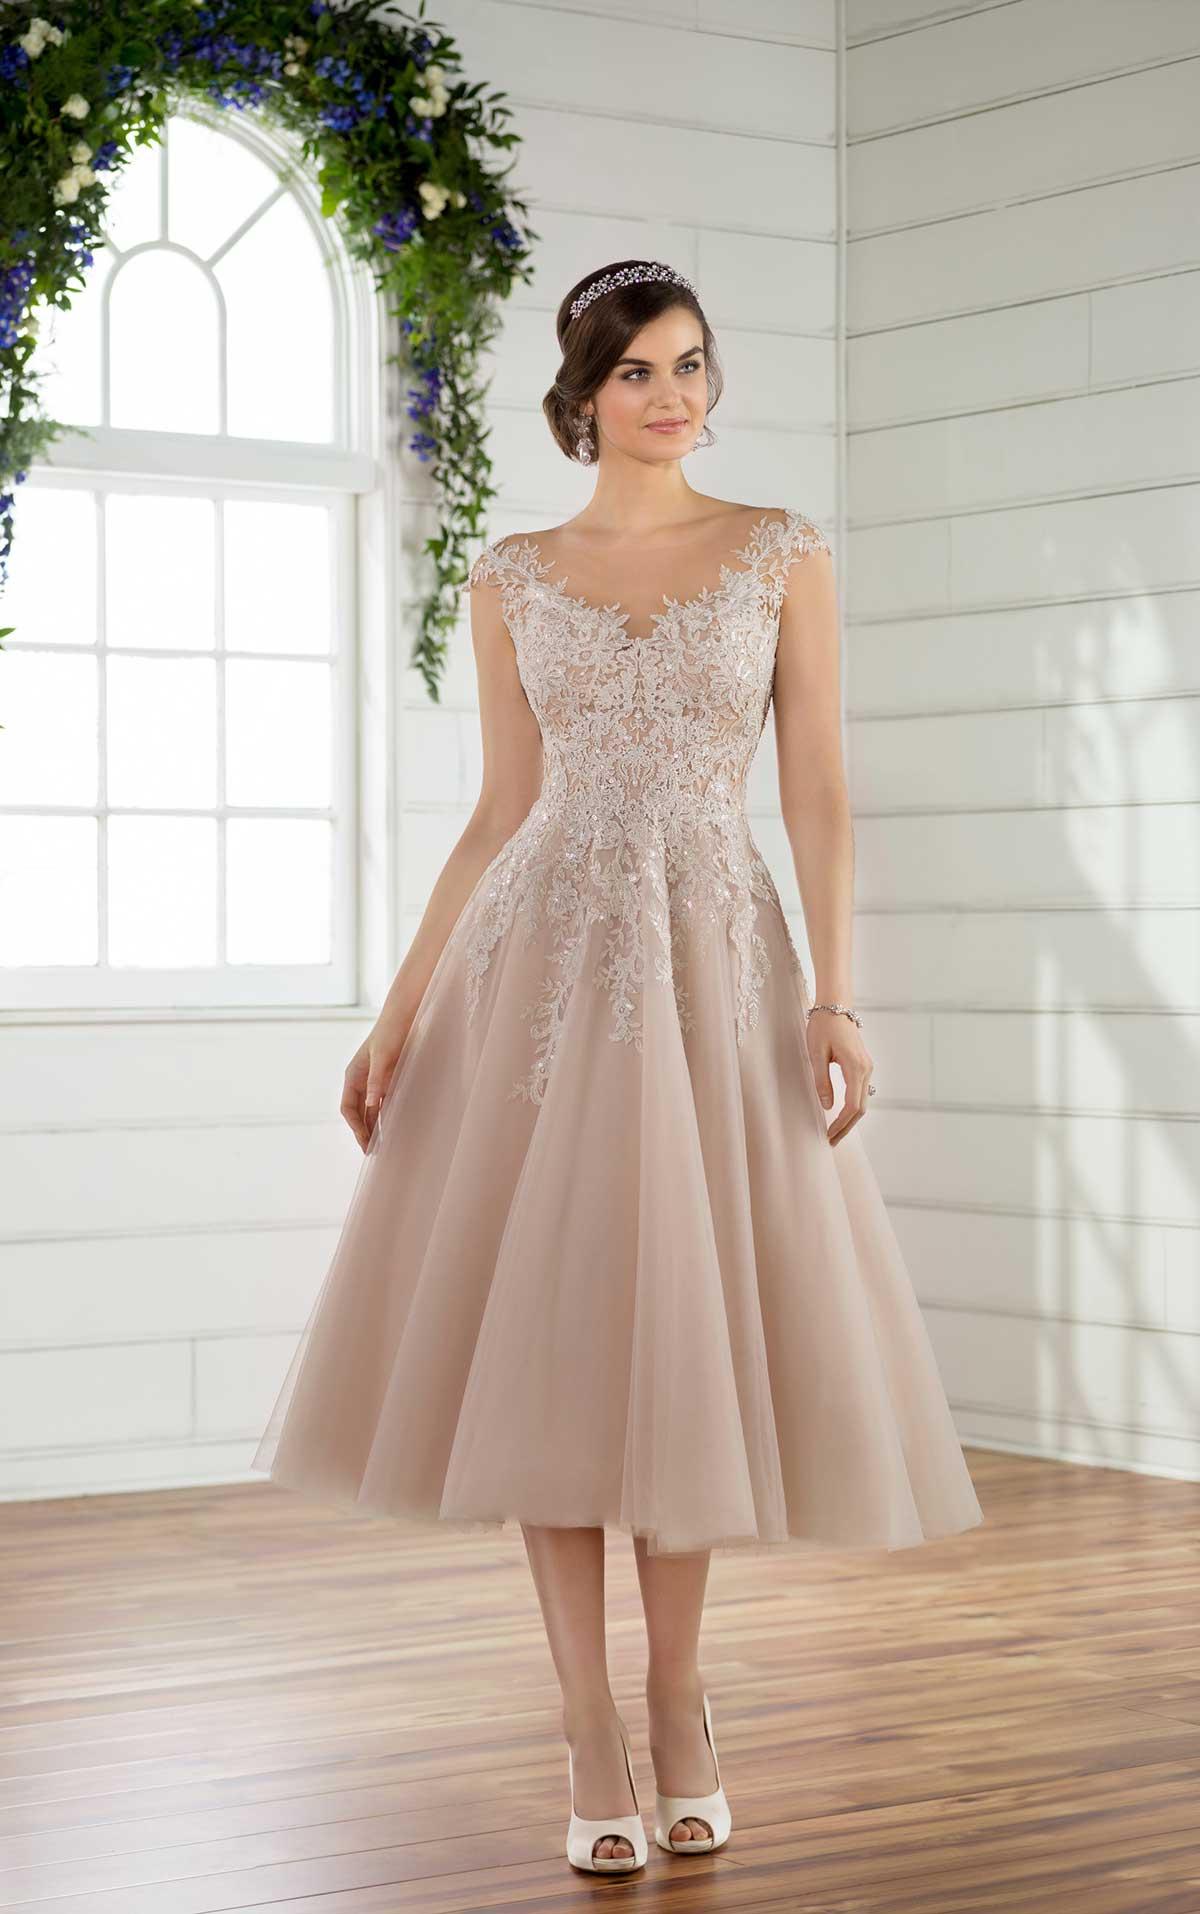 37 of the Best Tea Length Wedding Dresses - hitched.co.uk